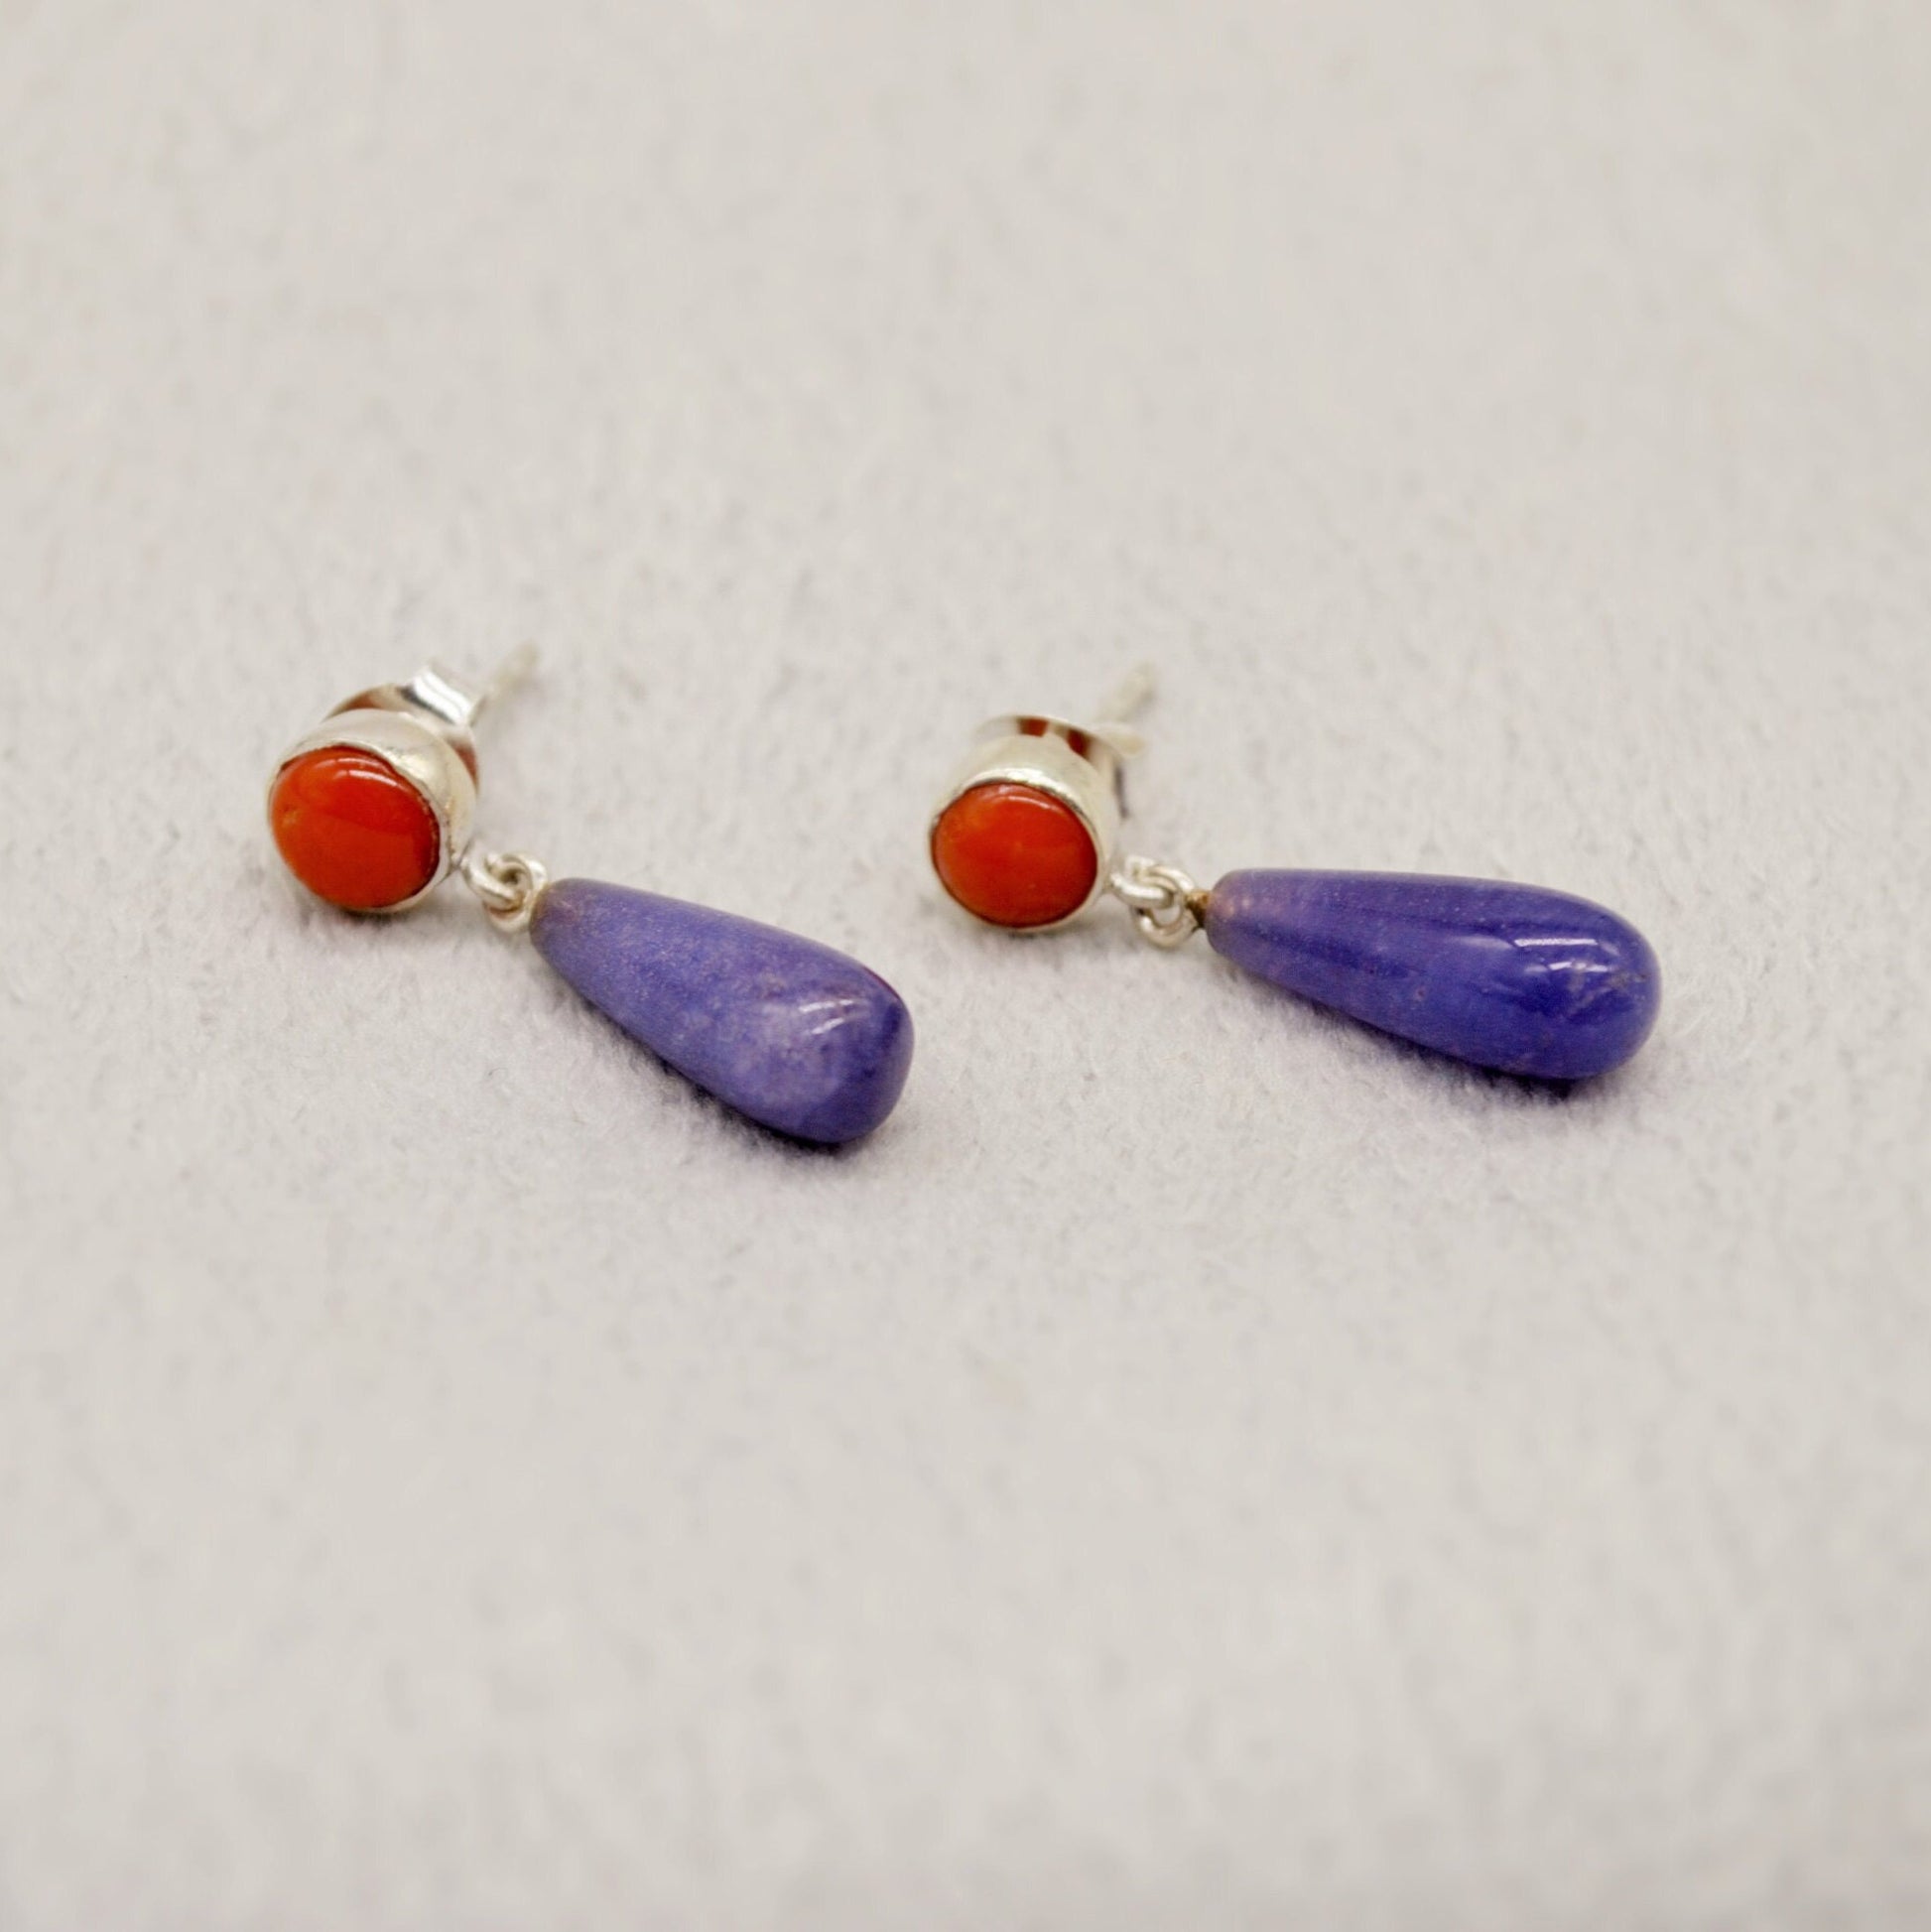 Purple Jade, Red Coral Drop Earrings, Sterling Silver, Red Coral Jewelry, Handmade Gemstone Earrings, Unique Cute Gifts For Her